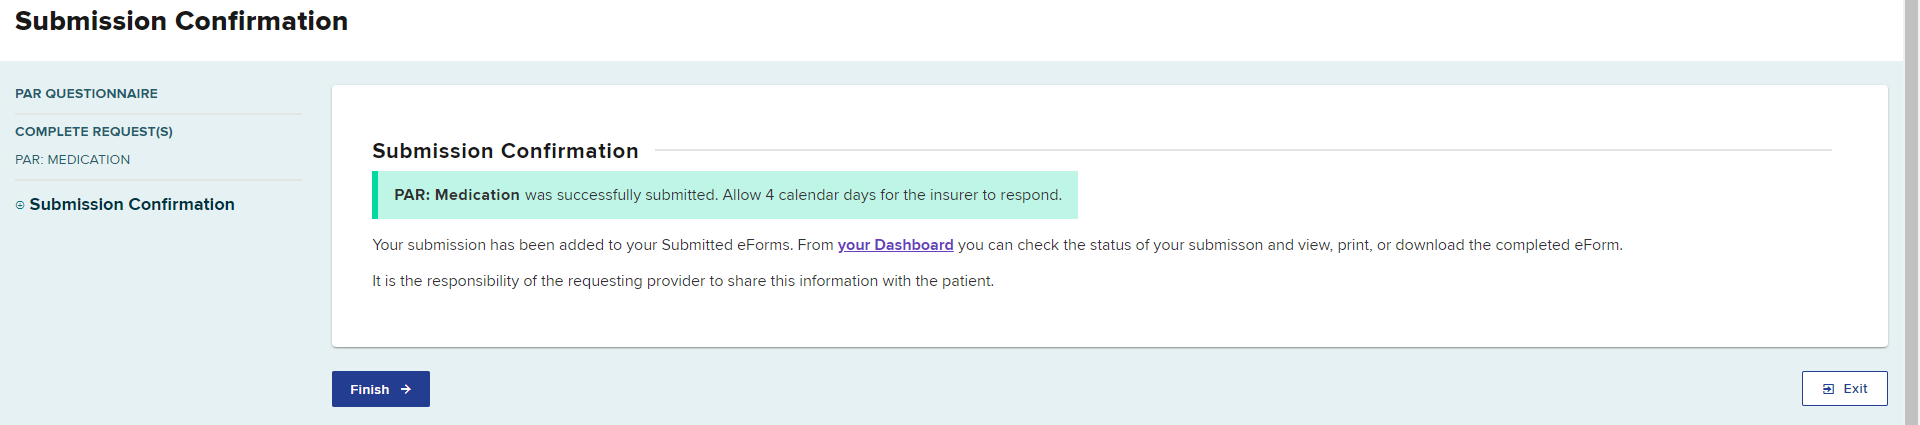 Medication PAR successfully submitted, Allow 4 calendar days for the insurer  to respond.